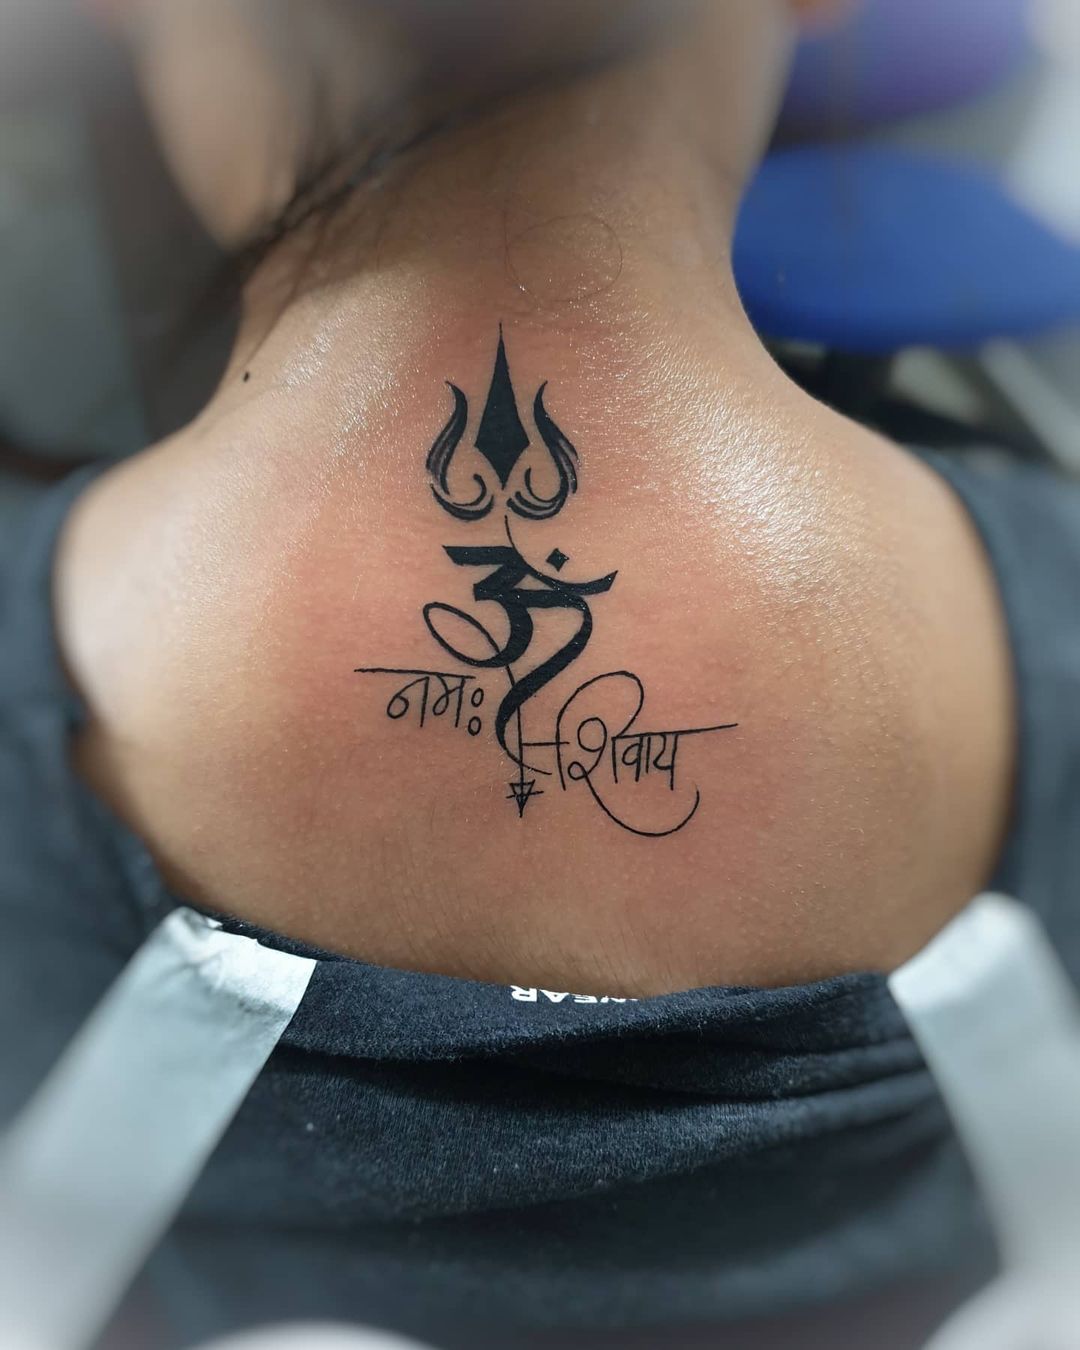 Translate and design calligraphic sanskrit tattoo by Thecalligraphy1 |  Fiverr